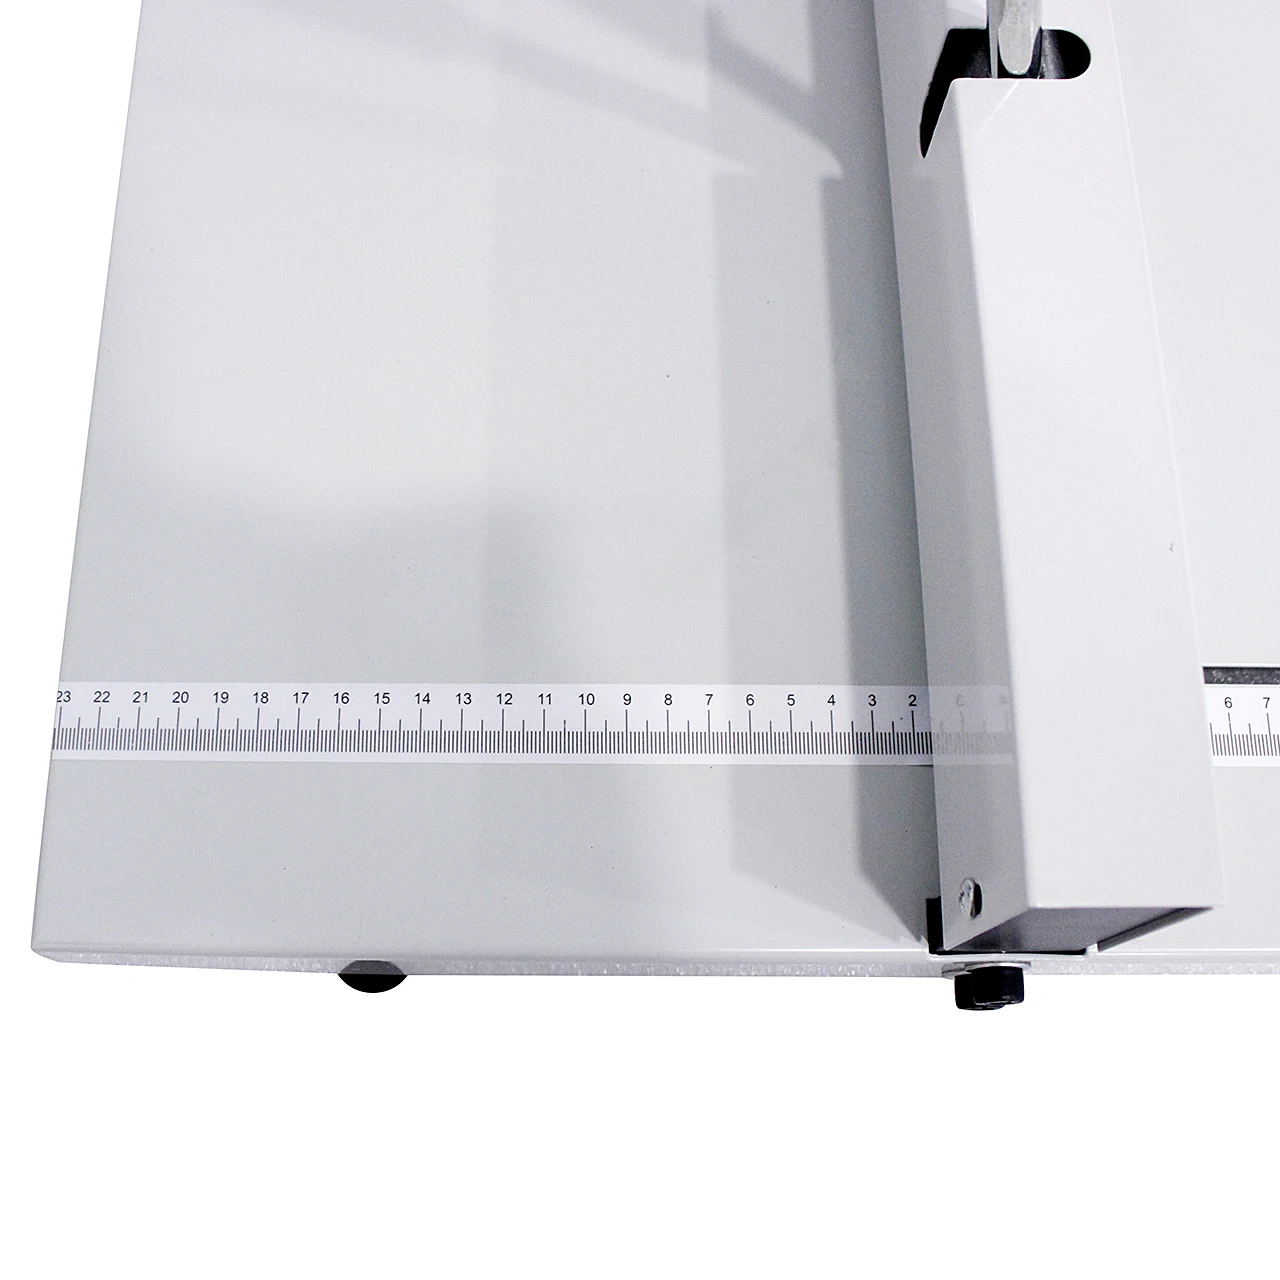 Manual Paper Creaser Creasing Machine 13.8 inch 350mm High Gloss Covers A4 Card Covers DENSHINE Manual Creasing Machine Scoring Paper Creasing Machine Scorer Perforator